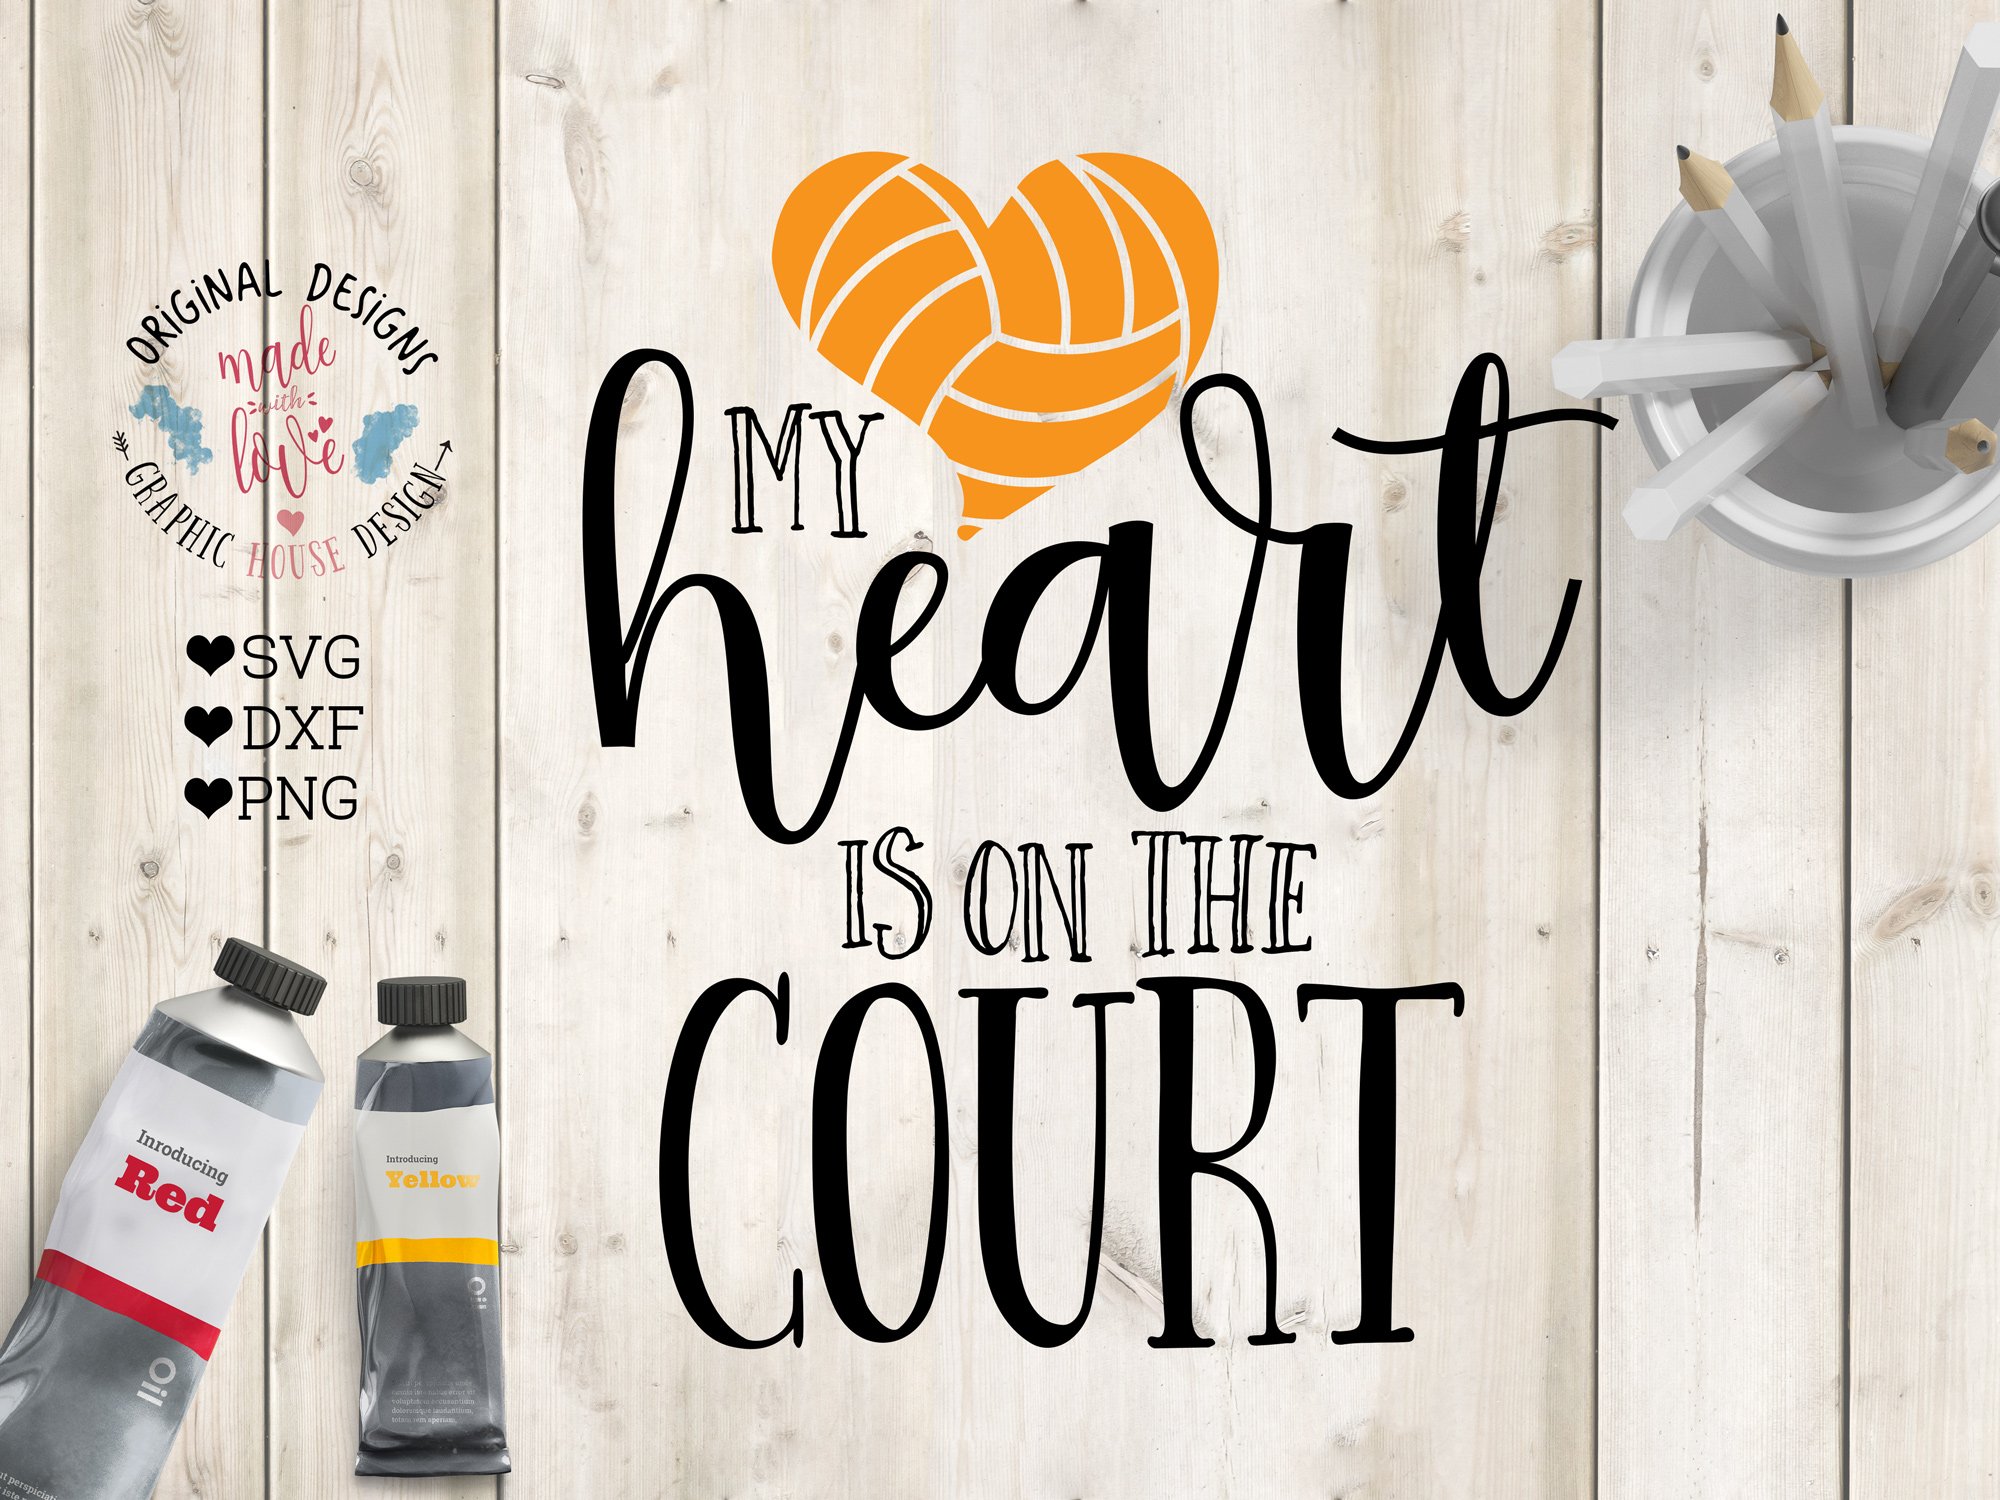 My Heart is on the Court cover image.